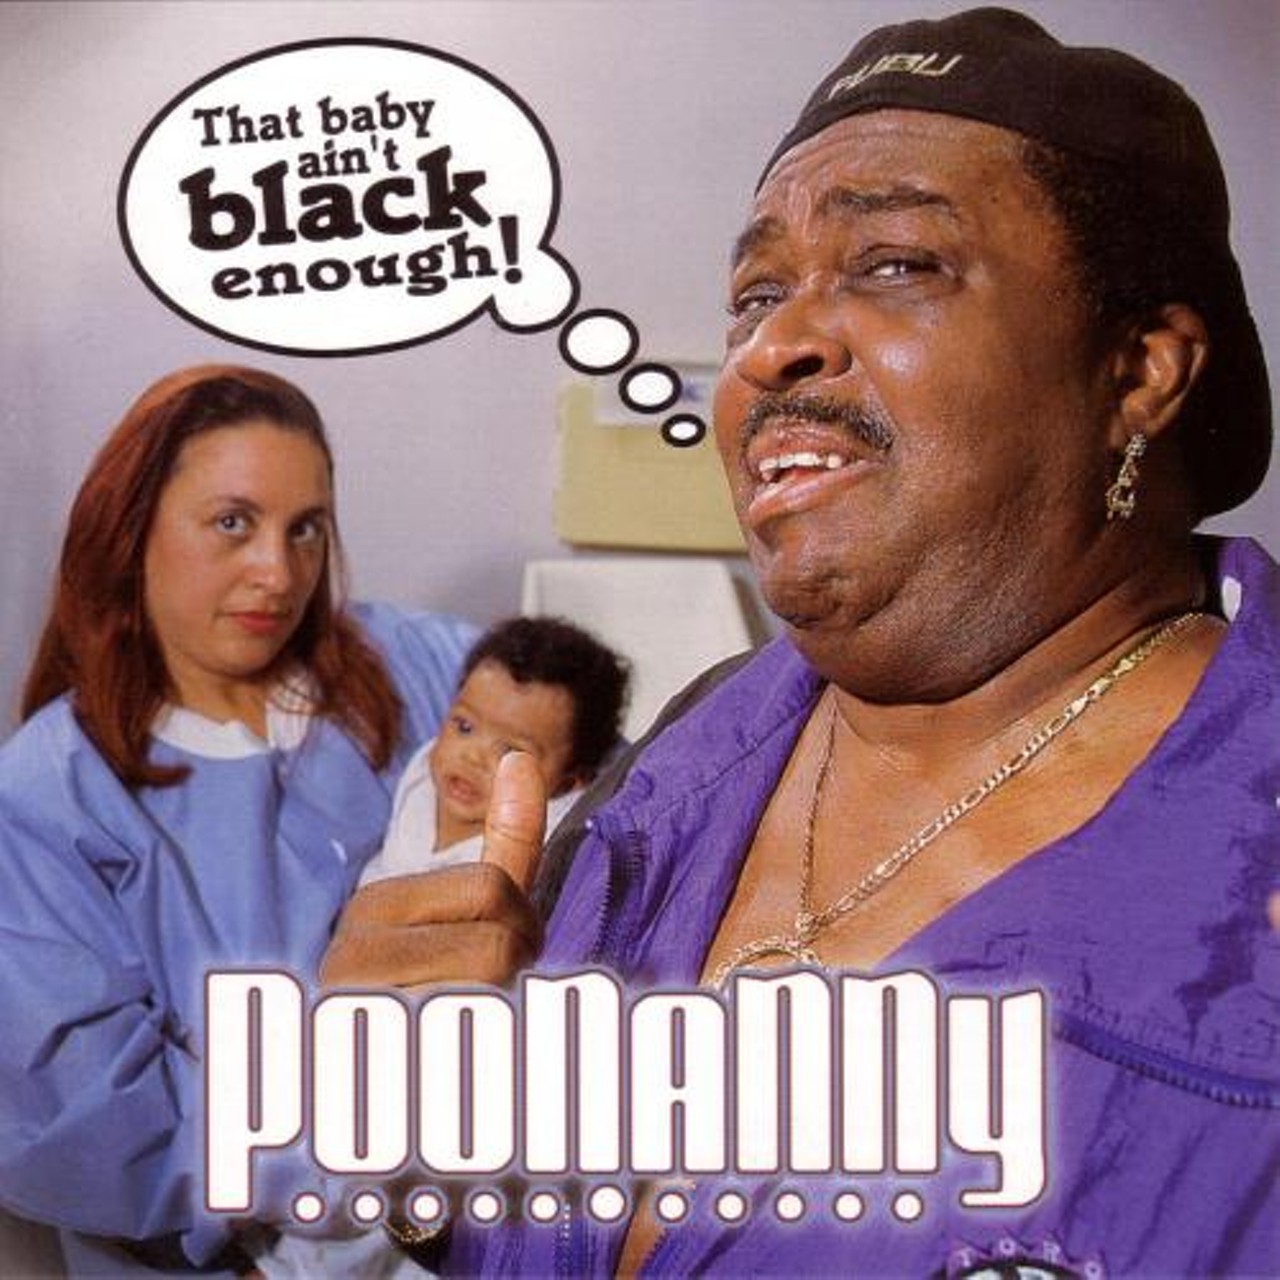 Poonanny: That Baby Ain't Black Enough  -- Poonanny is the blues comedian, the Weird Al of this genre. The title here says it all. Expect to see this unhappy threesome on one of Jerry Springer&rsquo;s DNA testing episodes pretty soon.